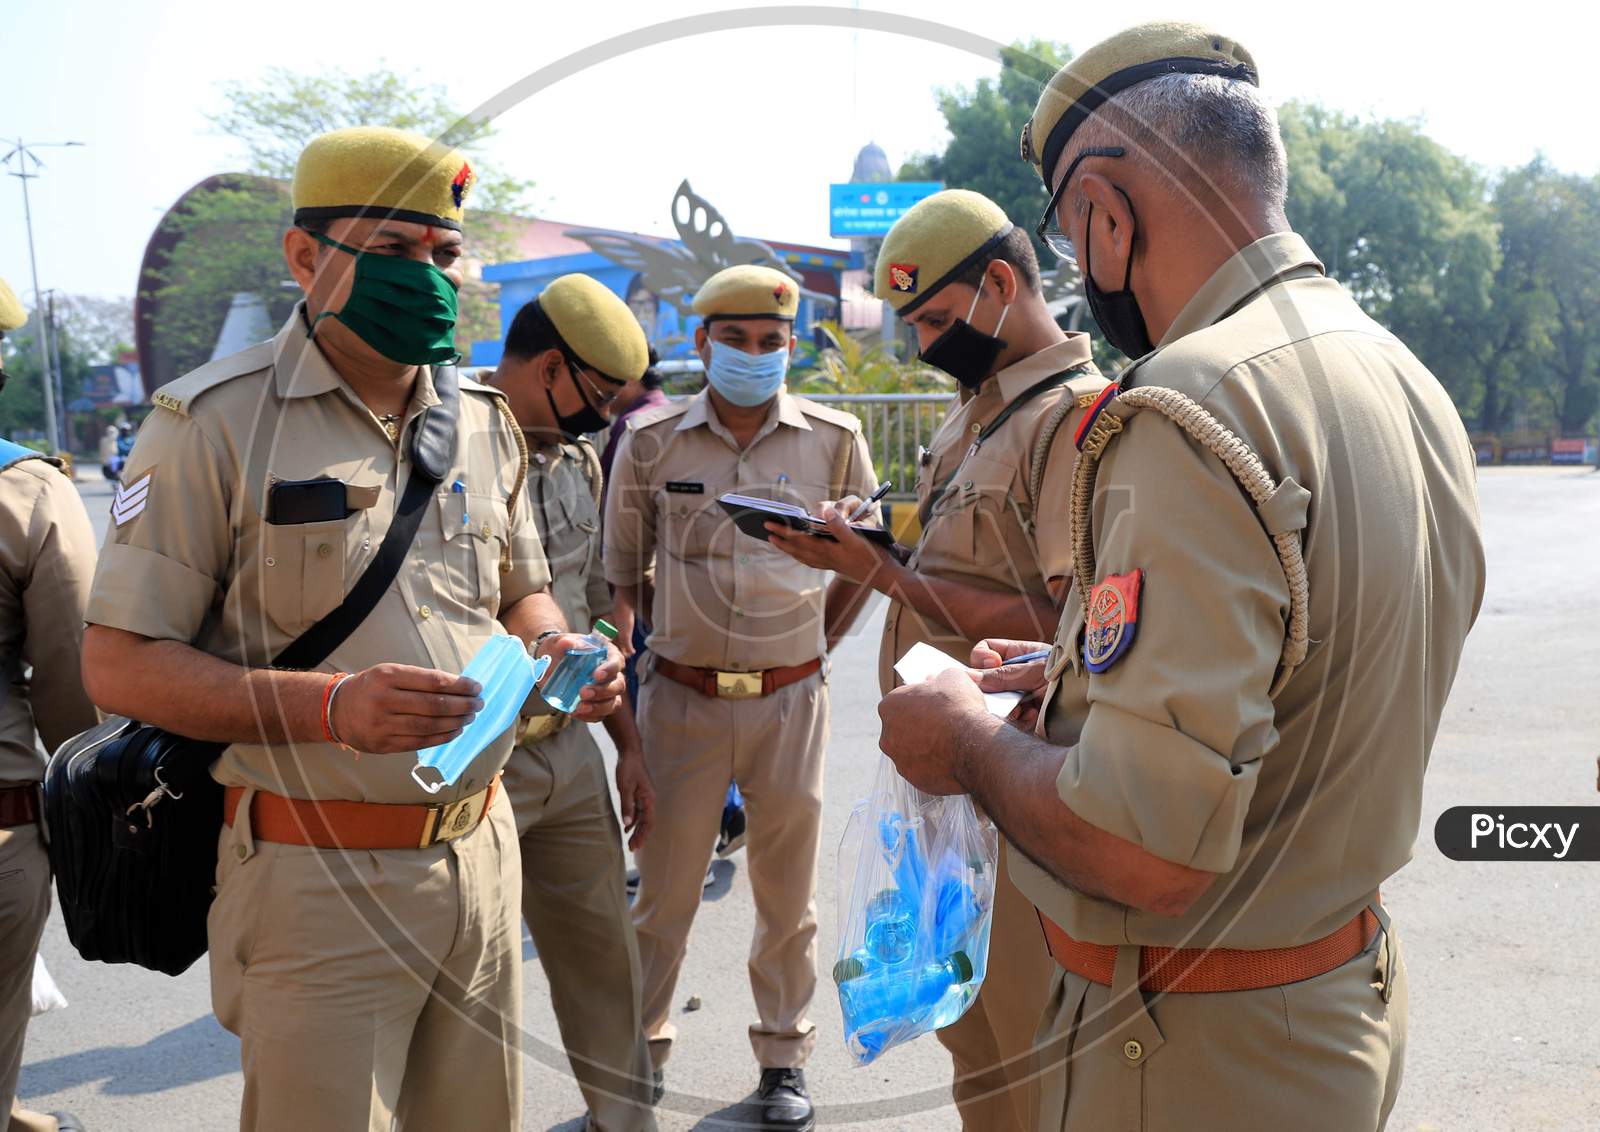 A police man distributes mask to other policemen during a government-imposed nationwide lockdown as a preventive measure against the COVID-19 corona virus in Prayagraj, April 28, 2020.